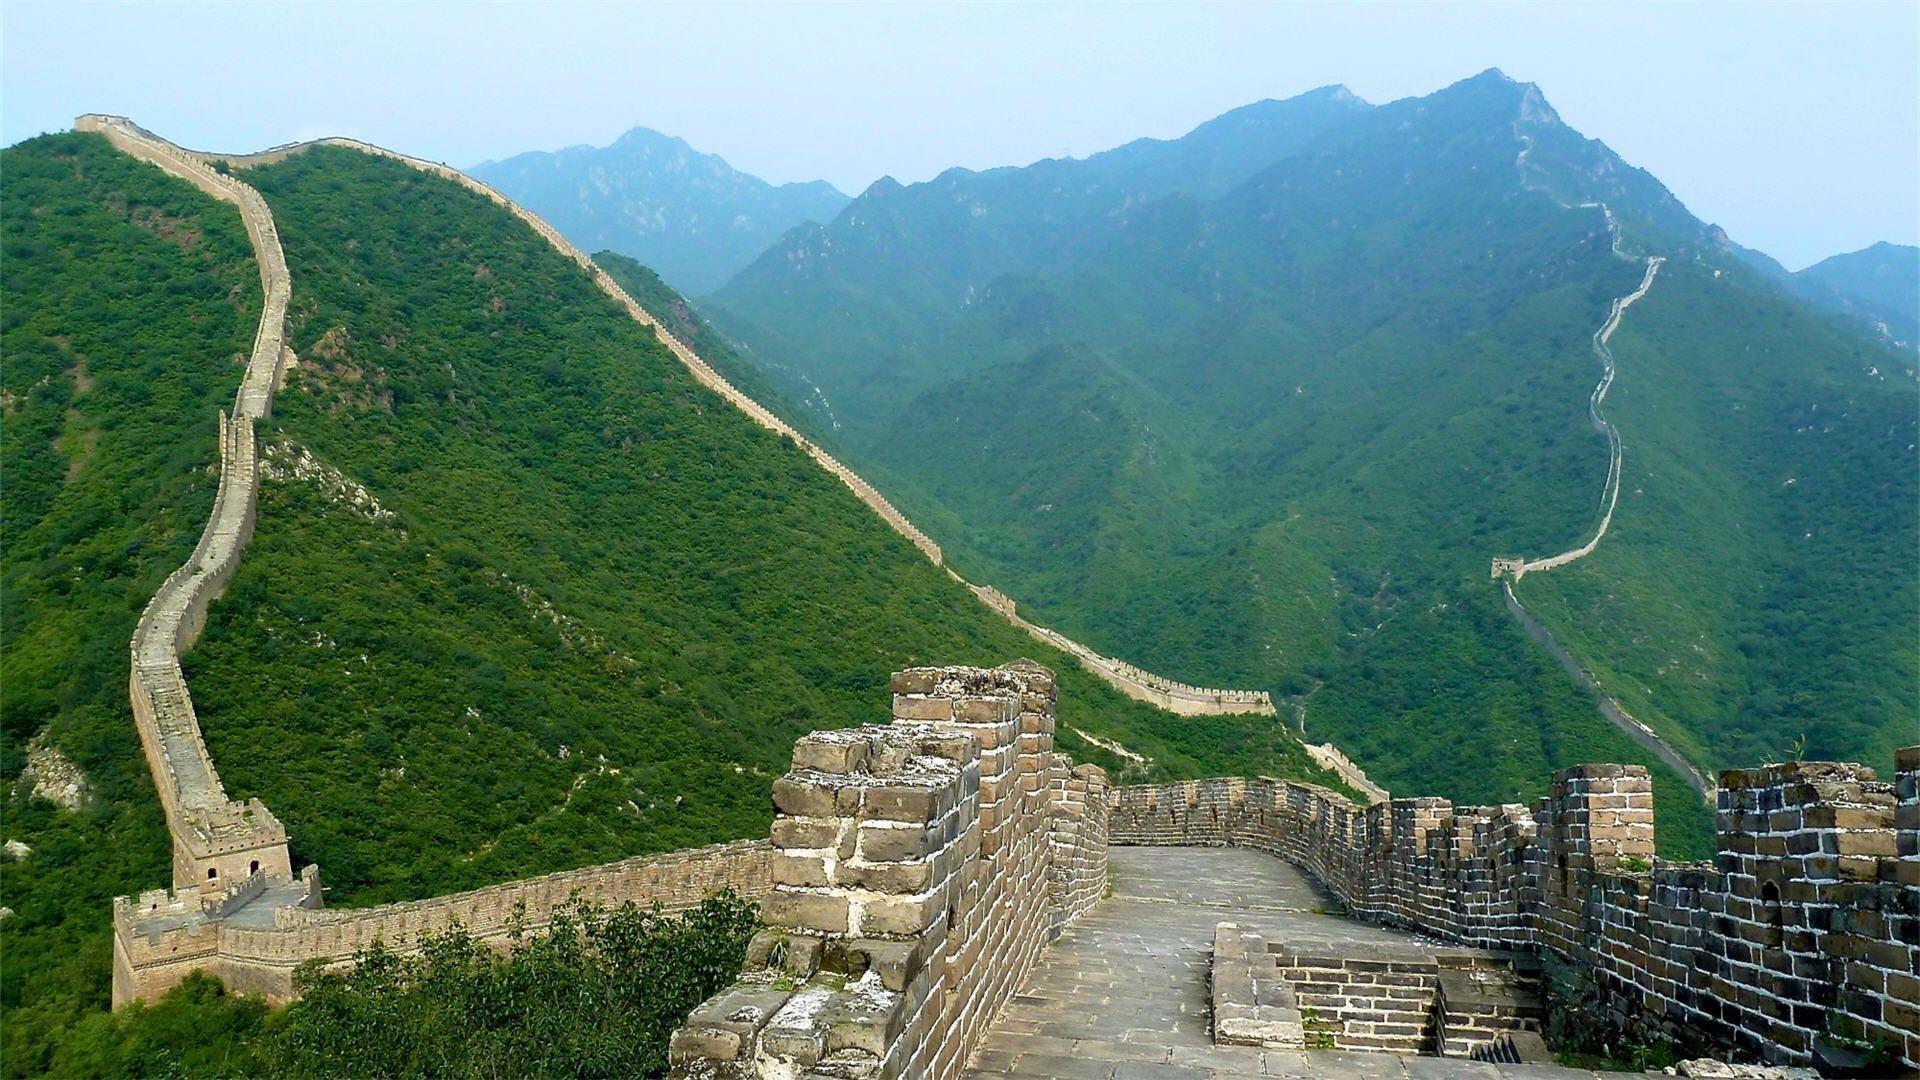 Great Wall Of China Wallpaper 11989 1920x1080 px